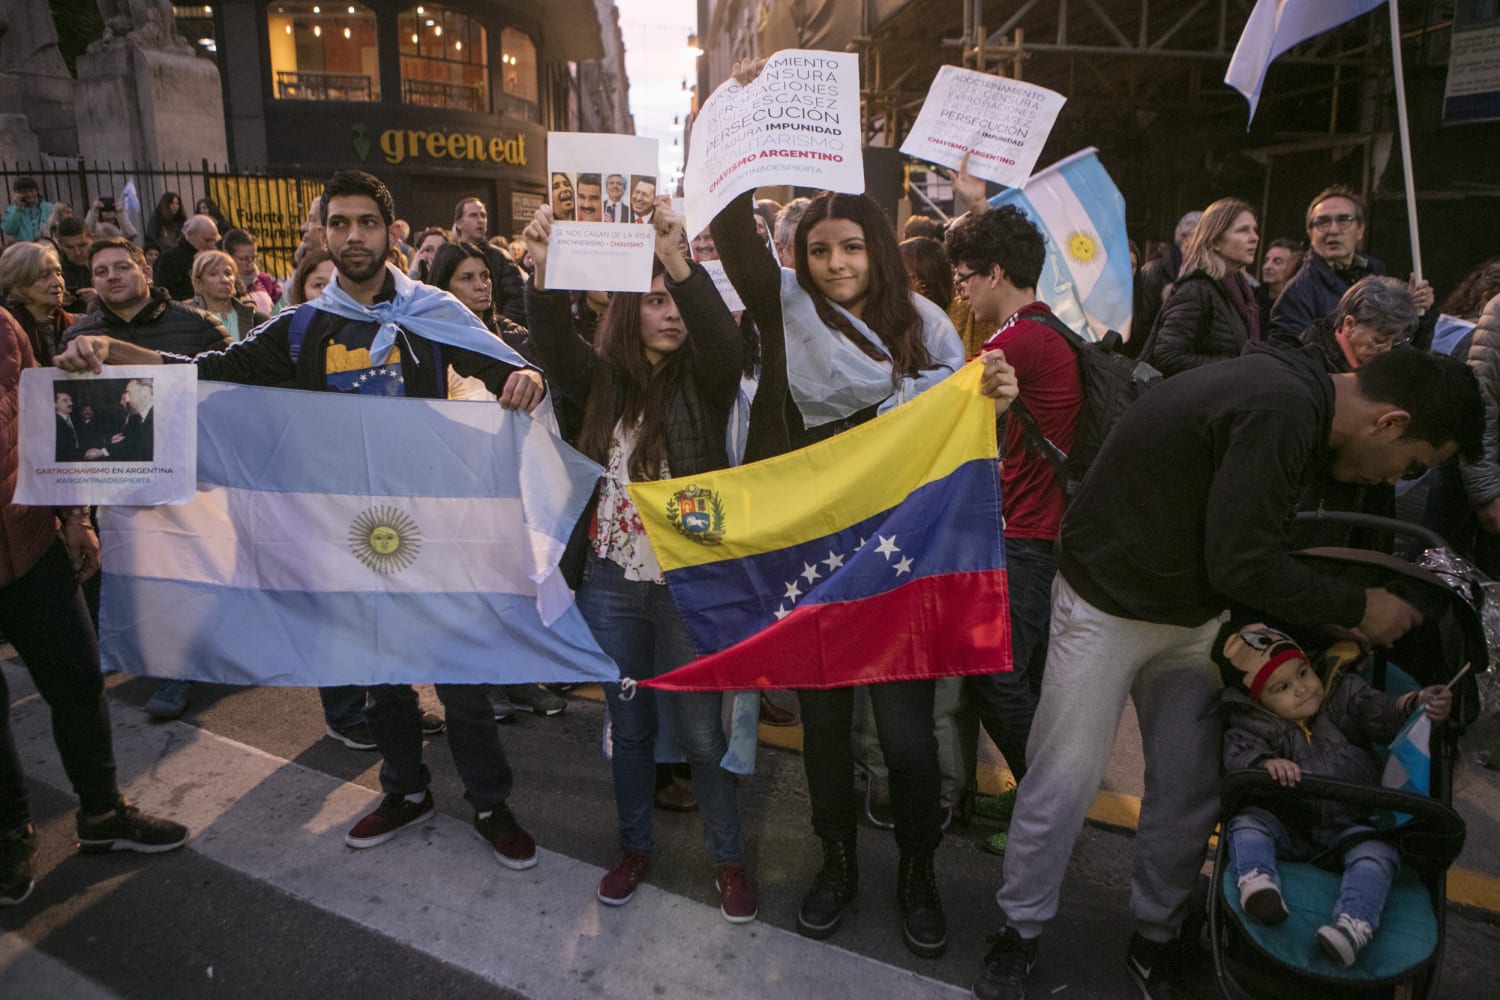 Why do so many Venezuelan immigrants support right-wing candidates in Latin America and the US?